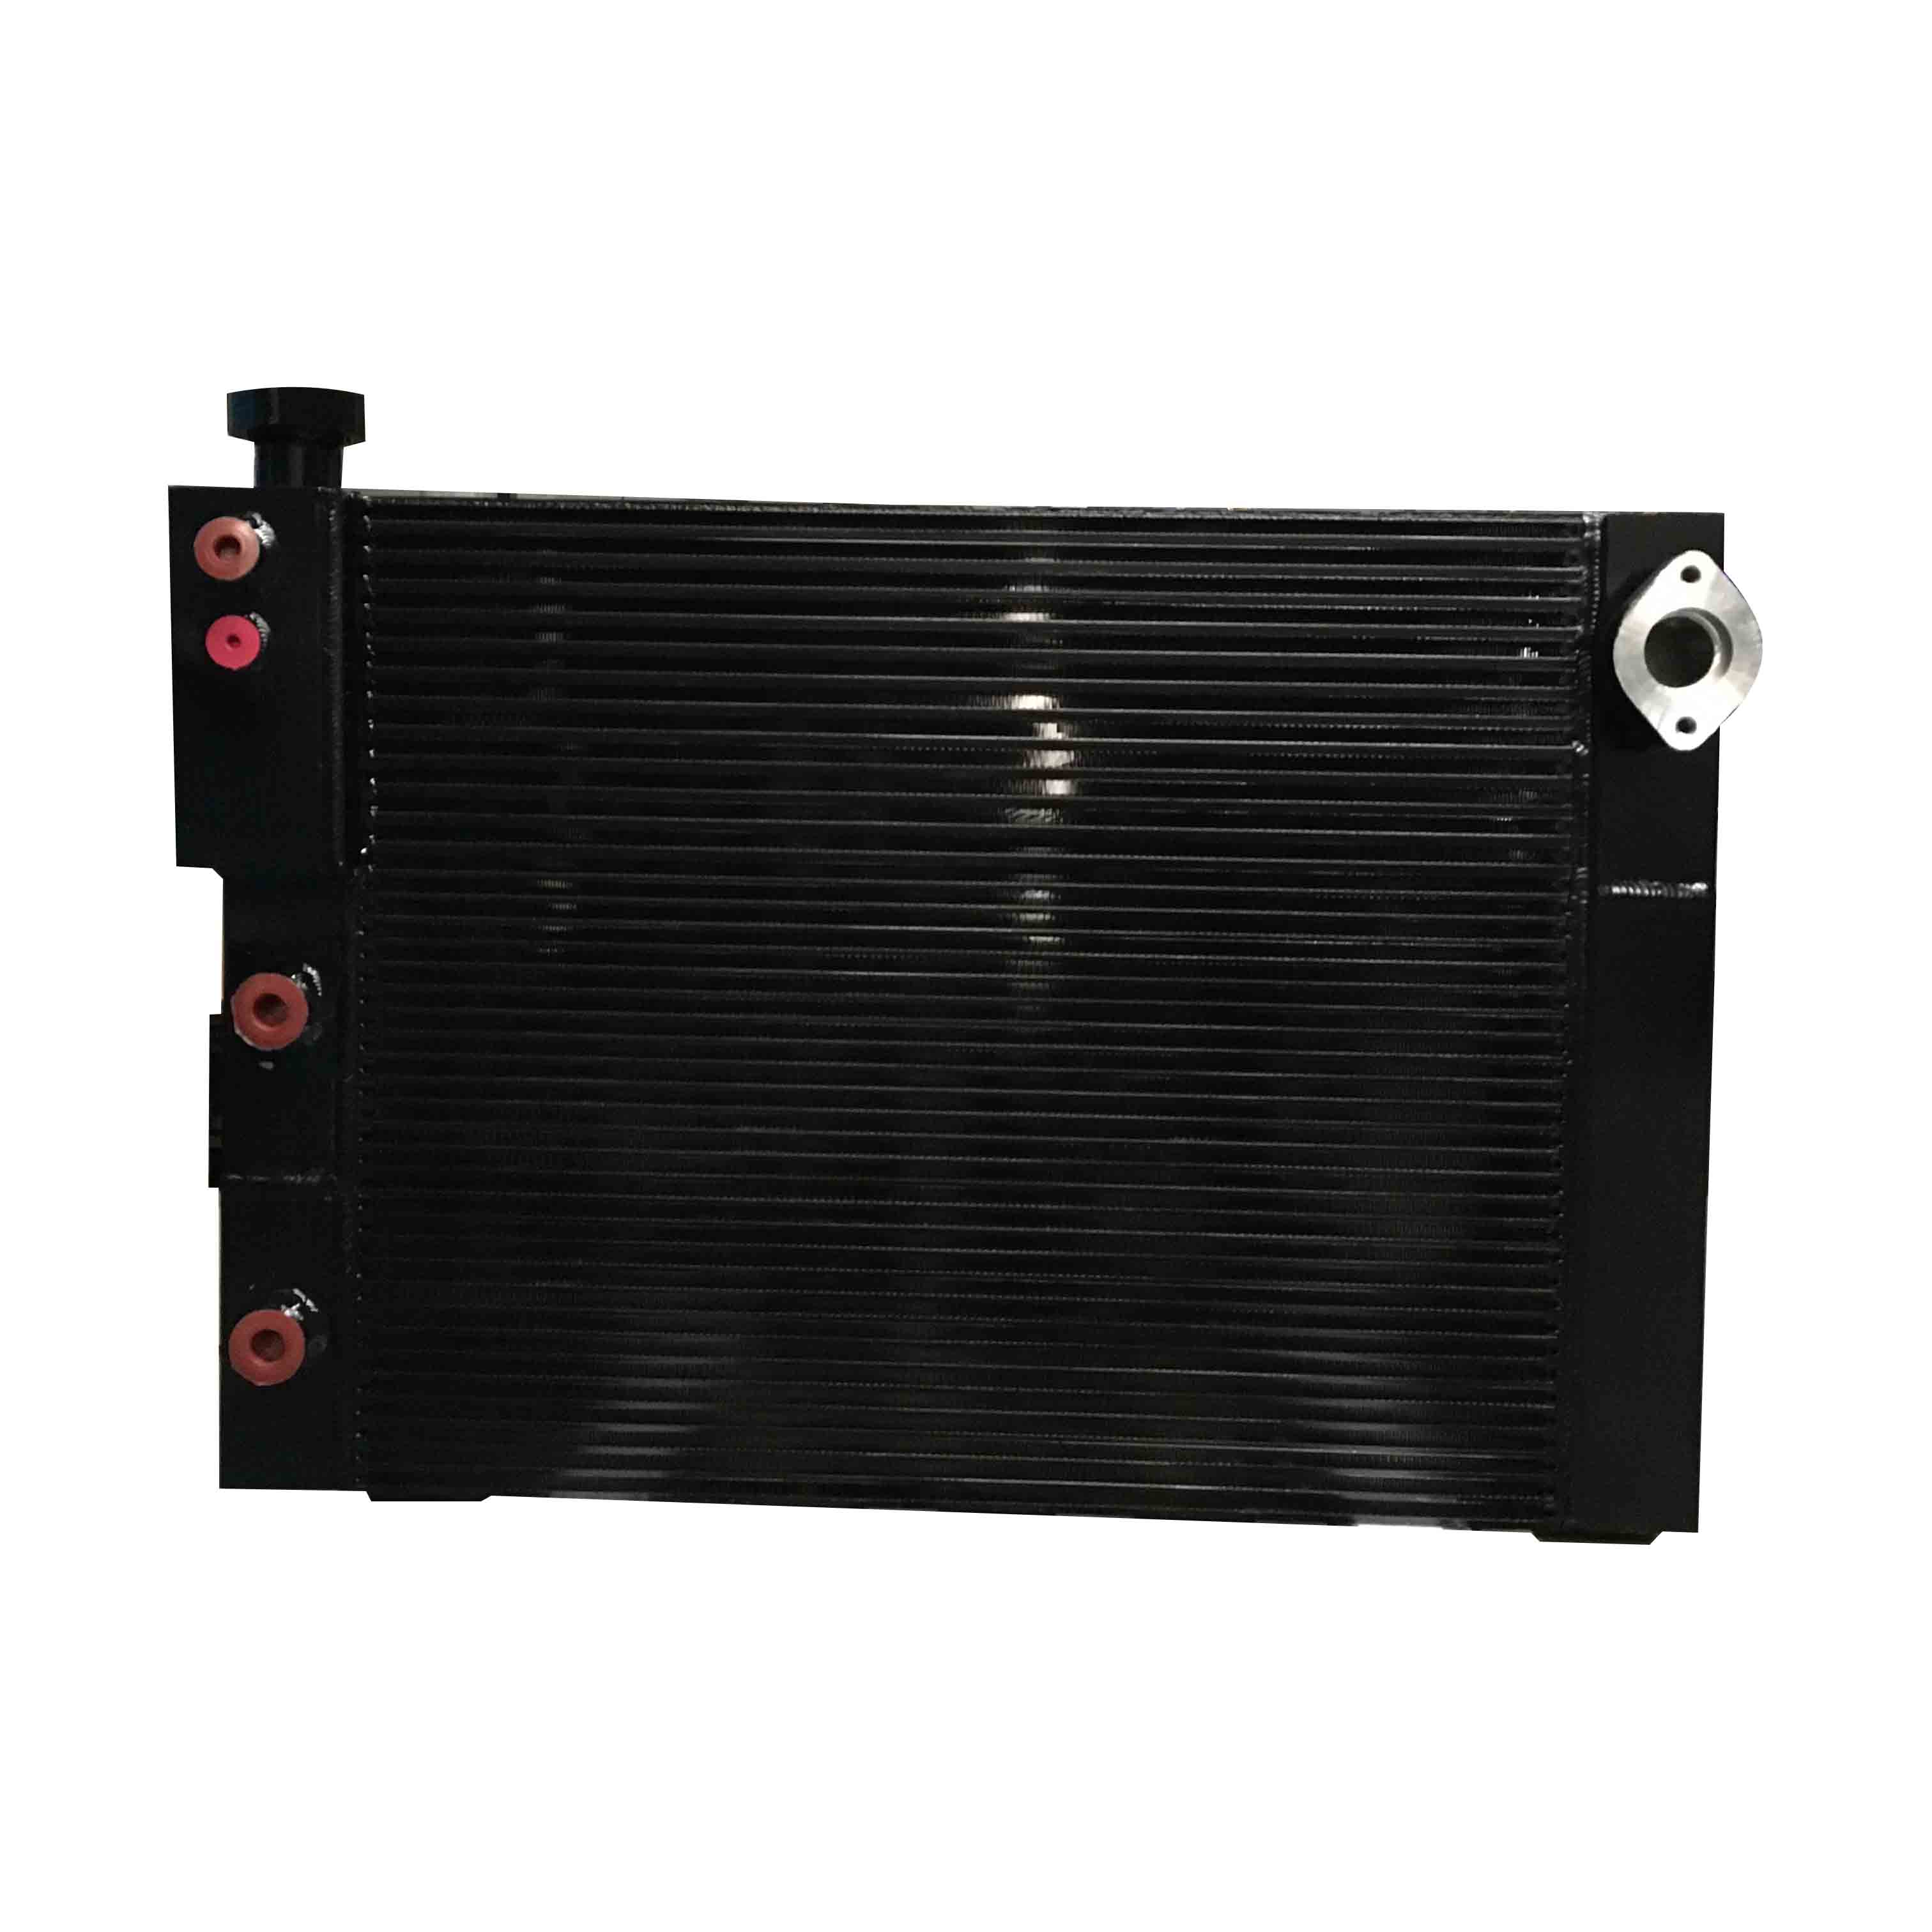 Oil and air cooler for air compressor